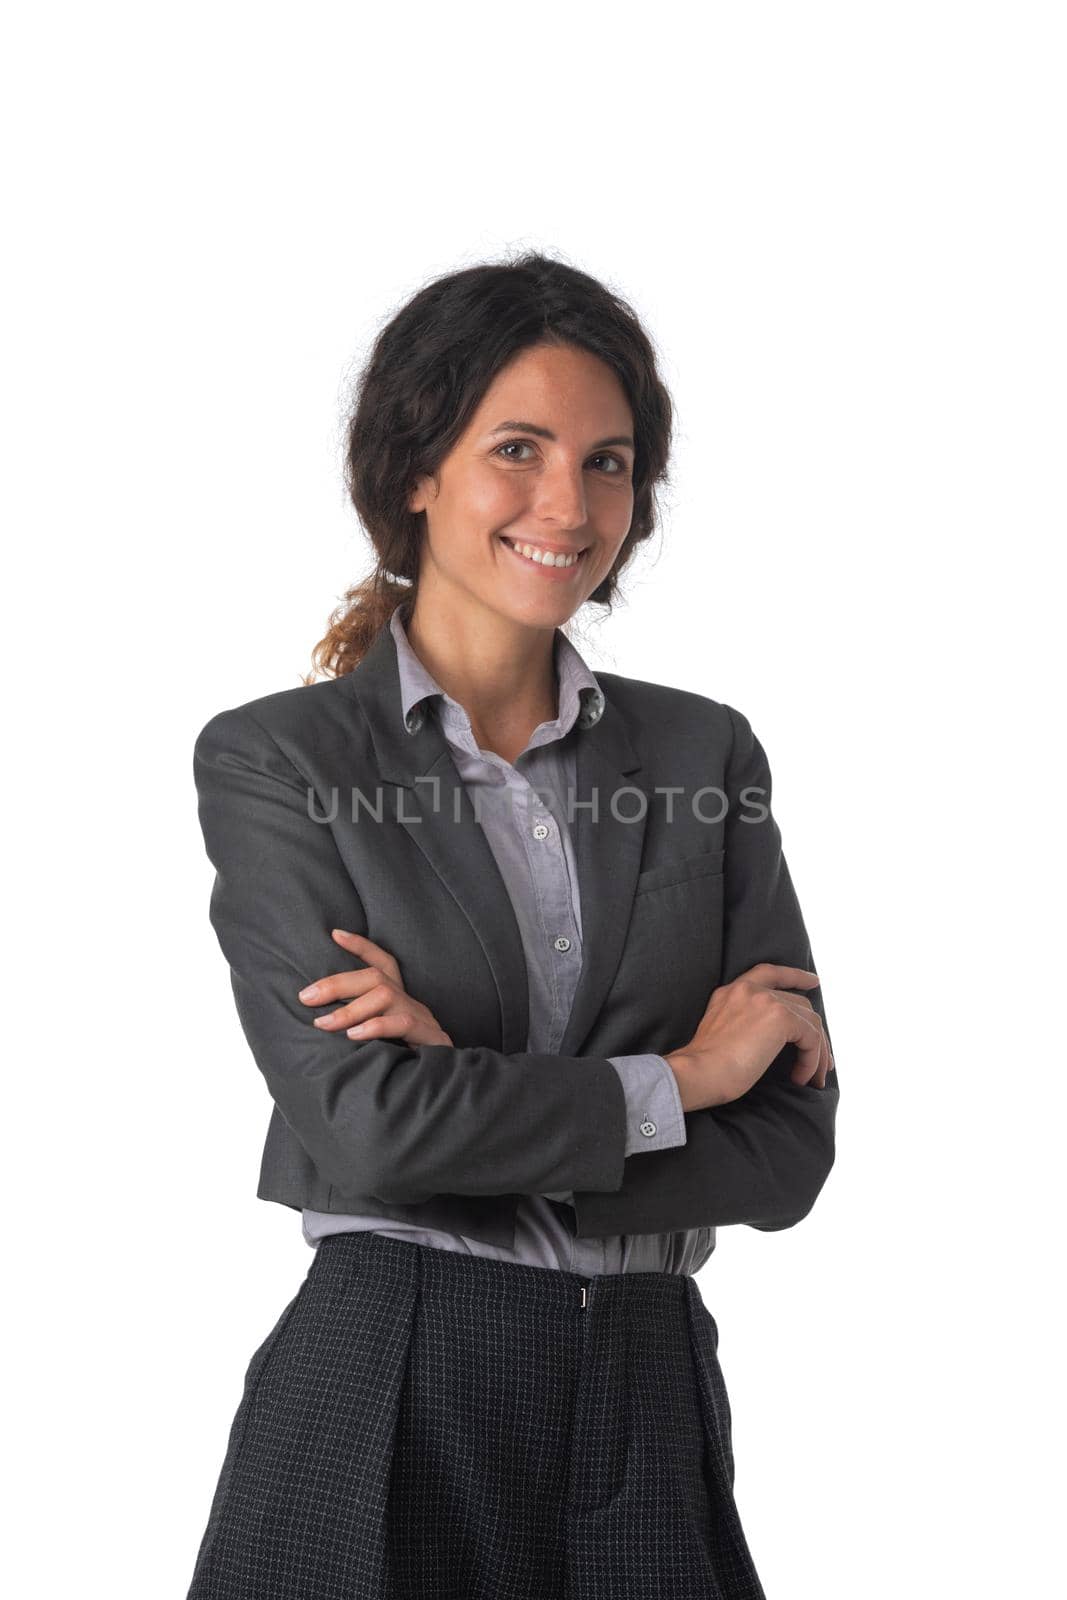 Portrait of young business woman with arms crossed studio isolated on white background